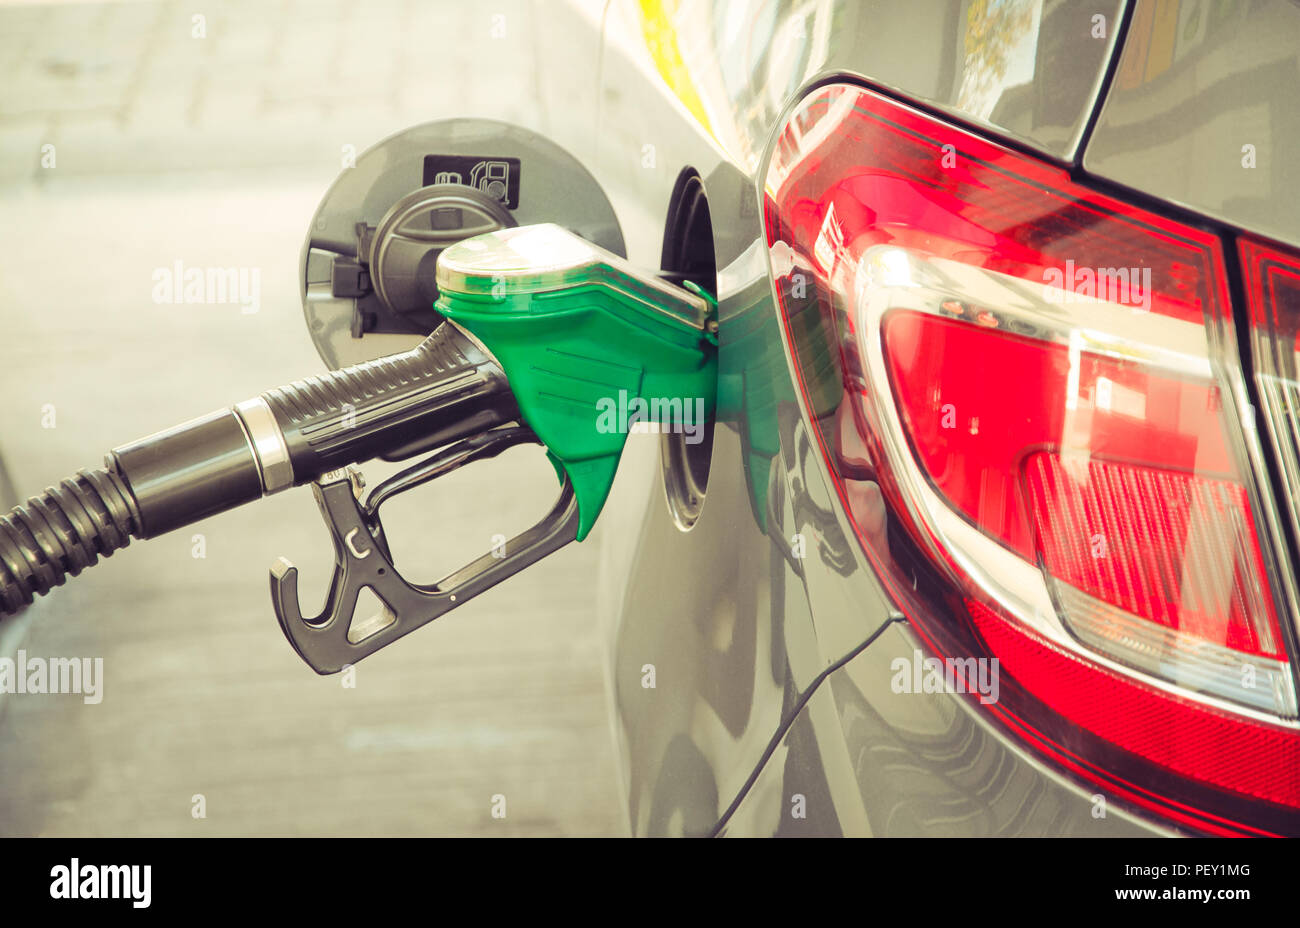 Car refueling at the petrol station. Concept photo for use of fuels (gasoline, diesel, ethanol) in combustion engines, air pollution and environmental Stock Photo